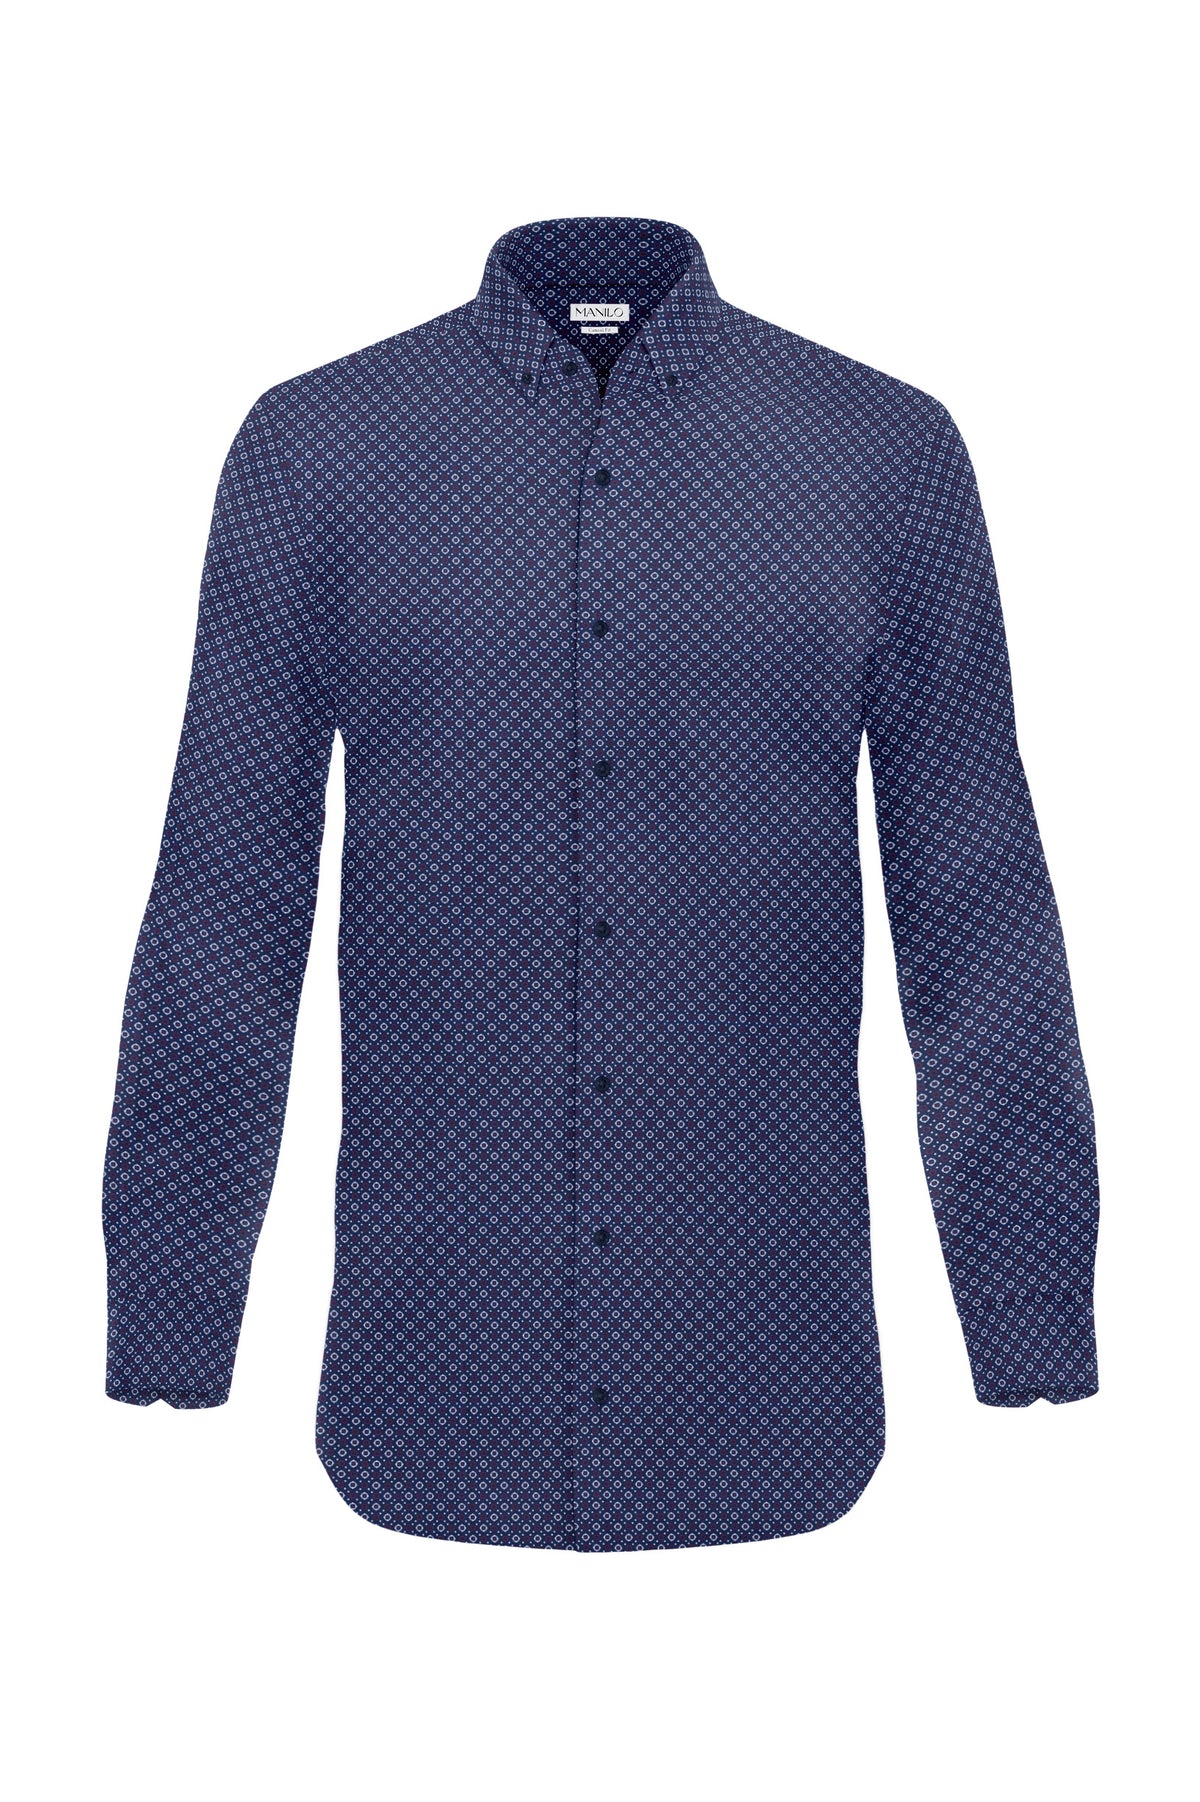 Printed casual shirt with graphic pattern in navy/white/red (Art. 2117-C)